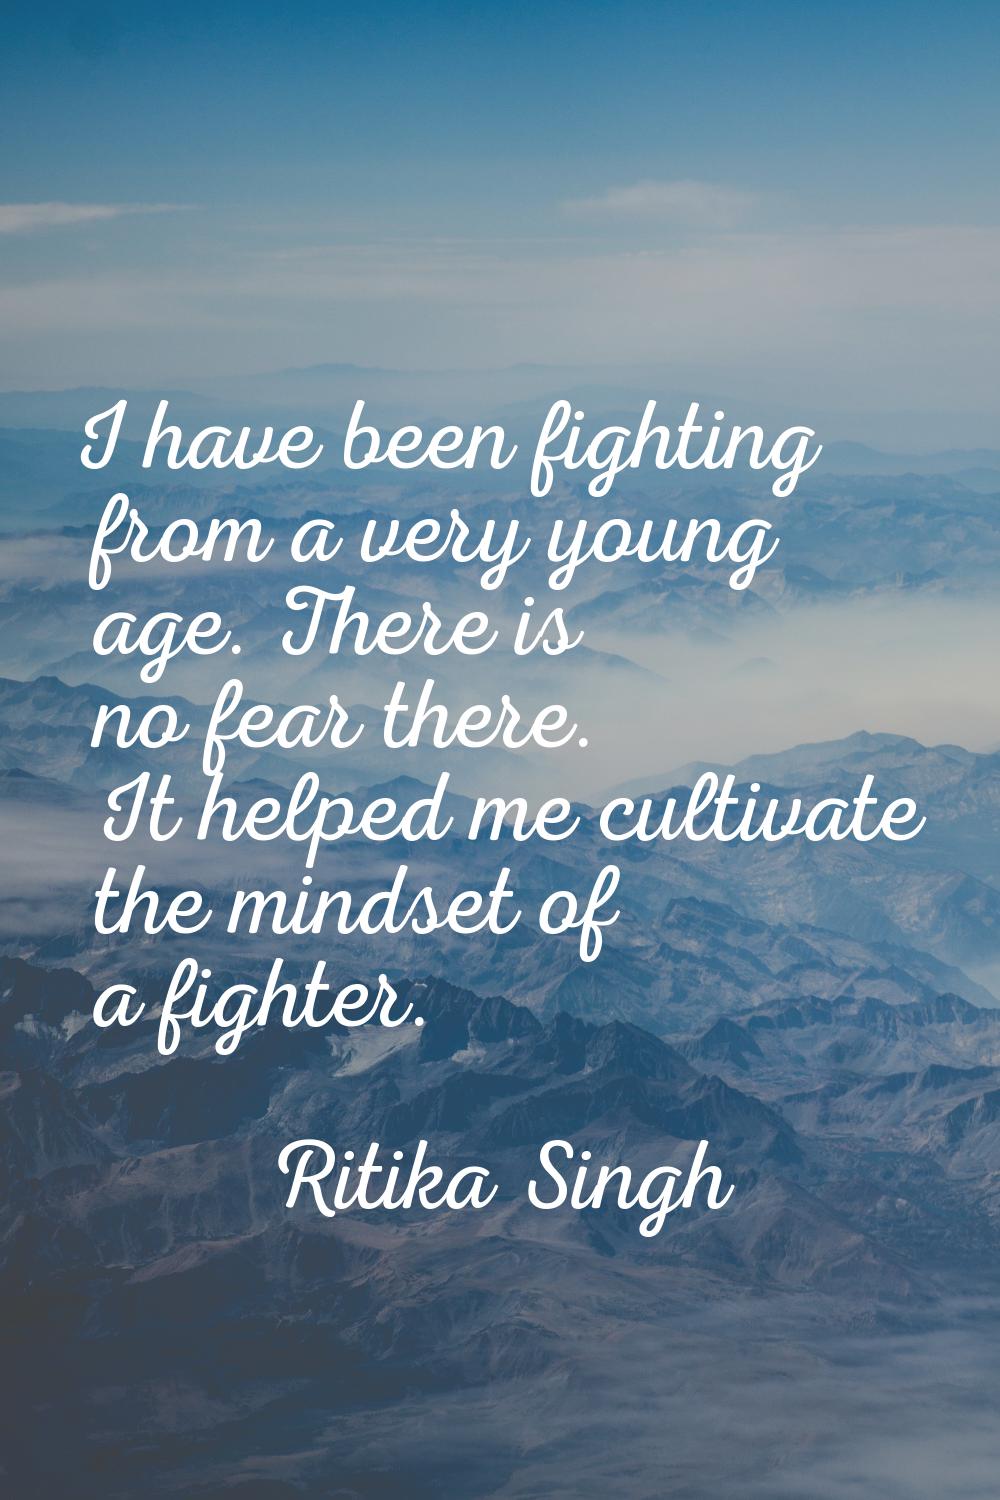 I have been fighting from a very young age. There is no fear there. It helped me cultivate the mind